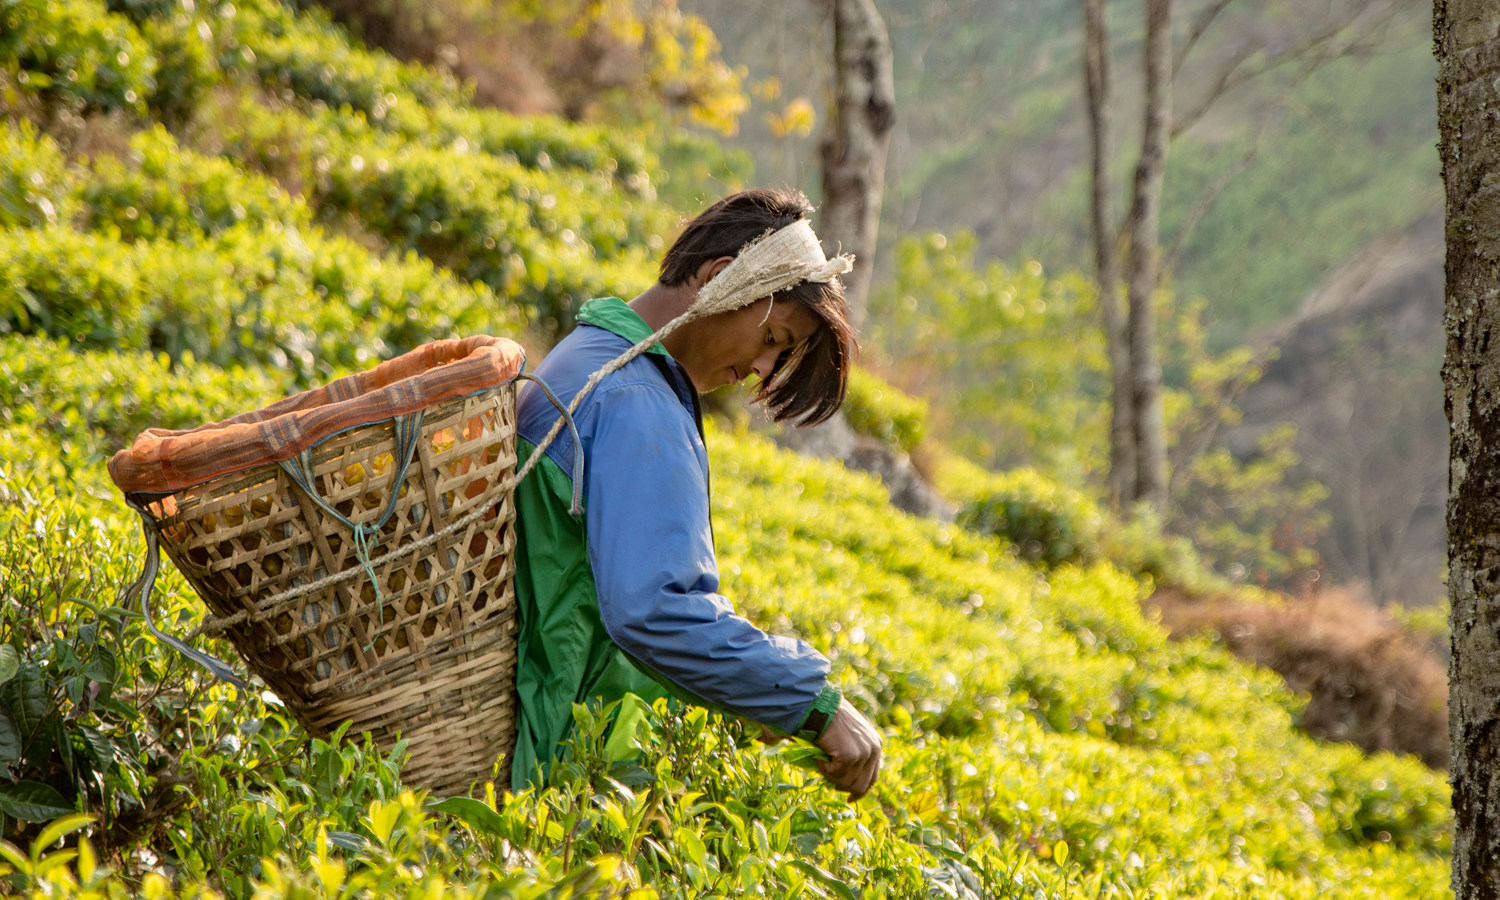 Nepal Tea is a business that aims to expand access to education and employment in its Eastern Nepal community.